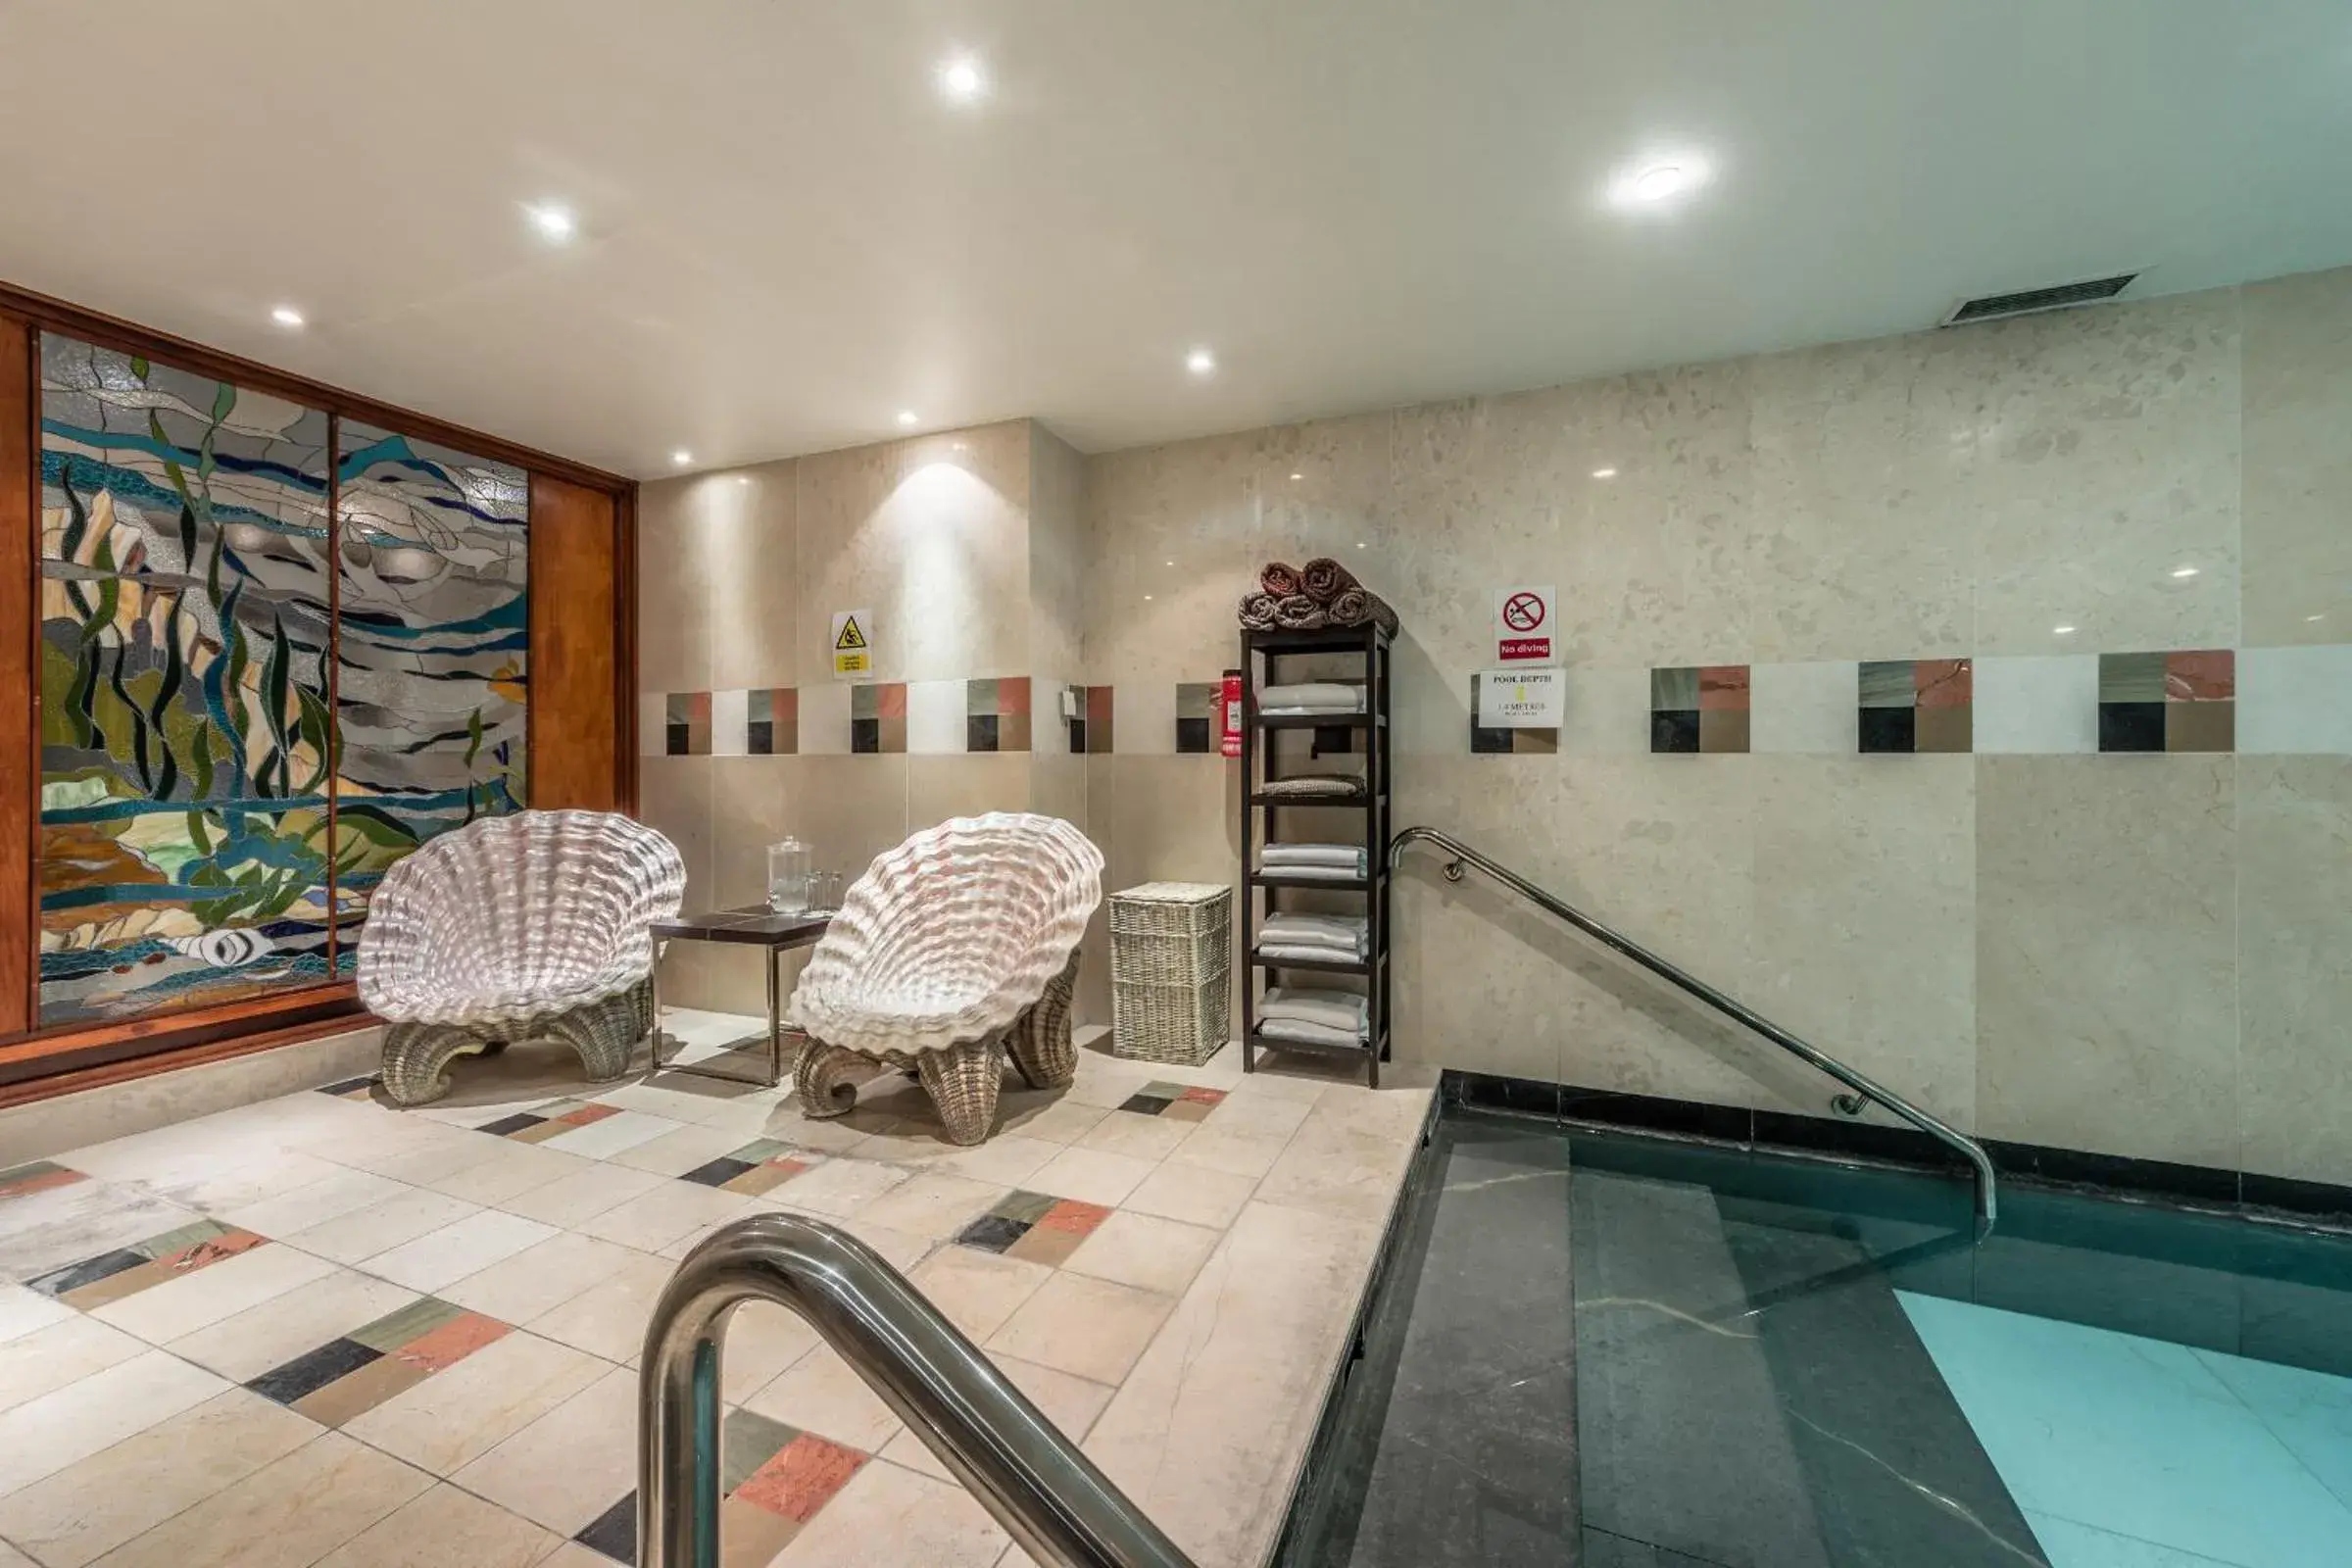 Swimming Pool in Courthouse Hotel London